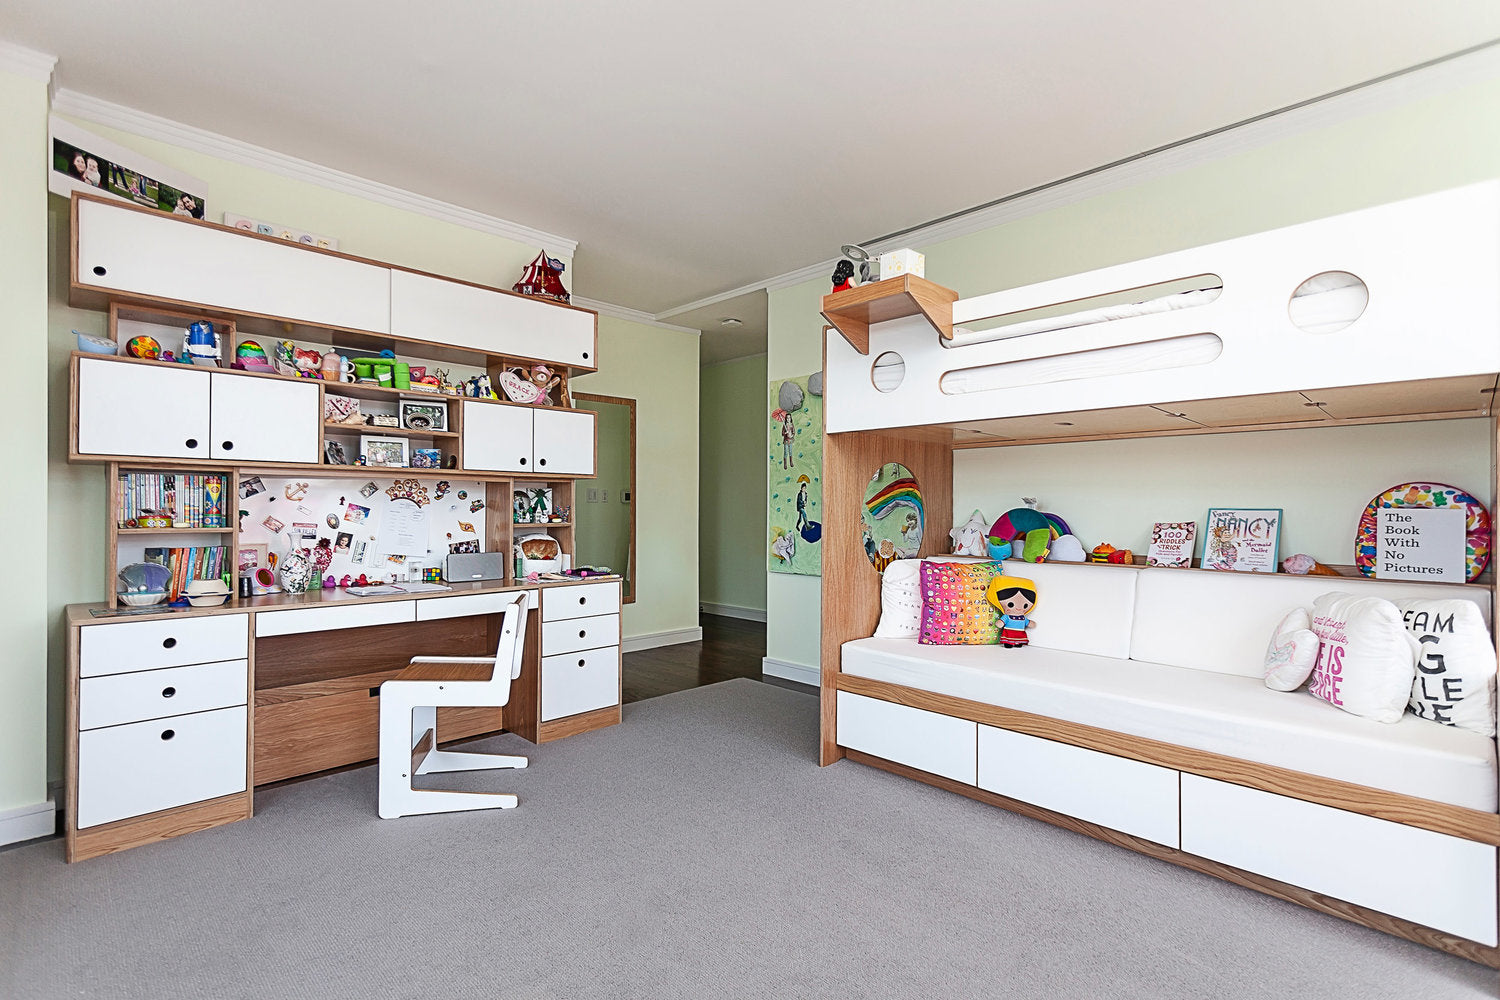 Child’s room with bunk bed, desk, shelves, and vibrant decor.